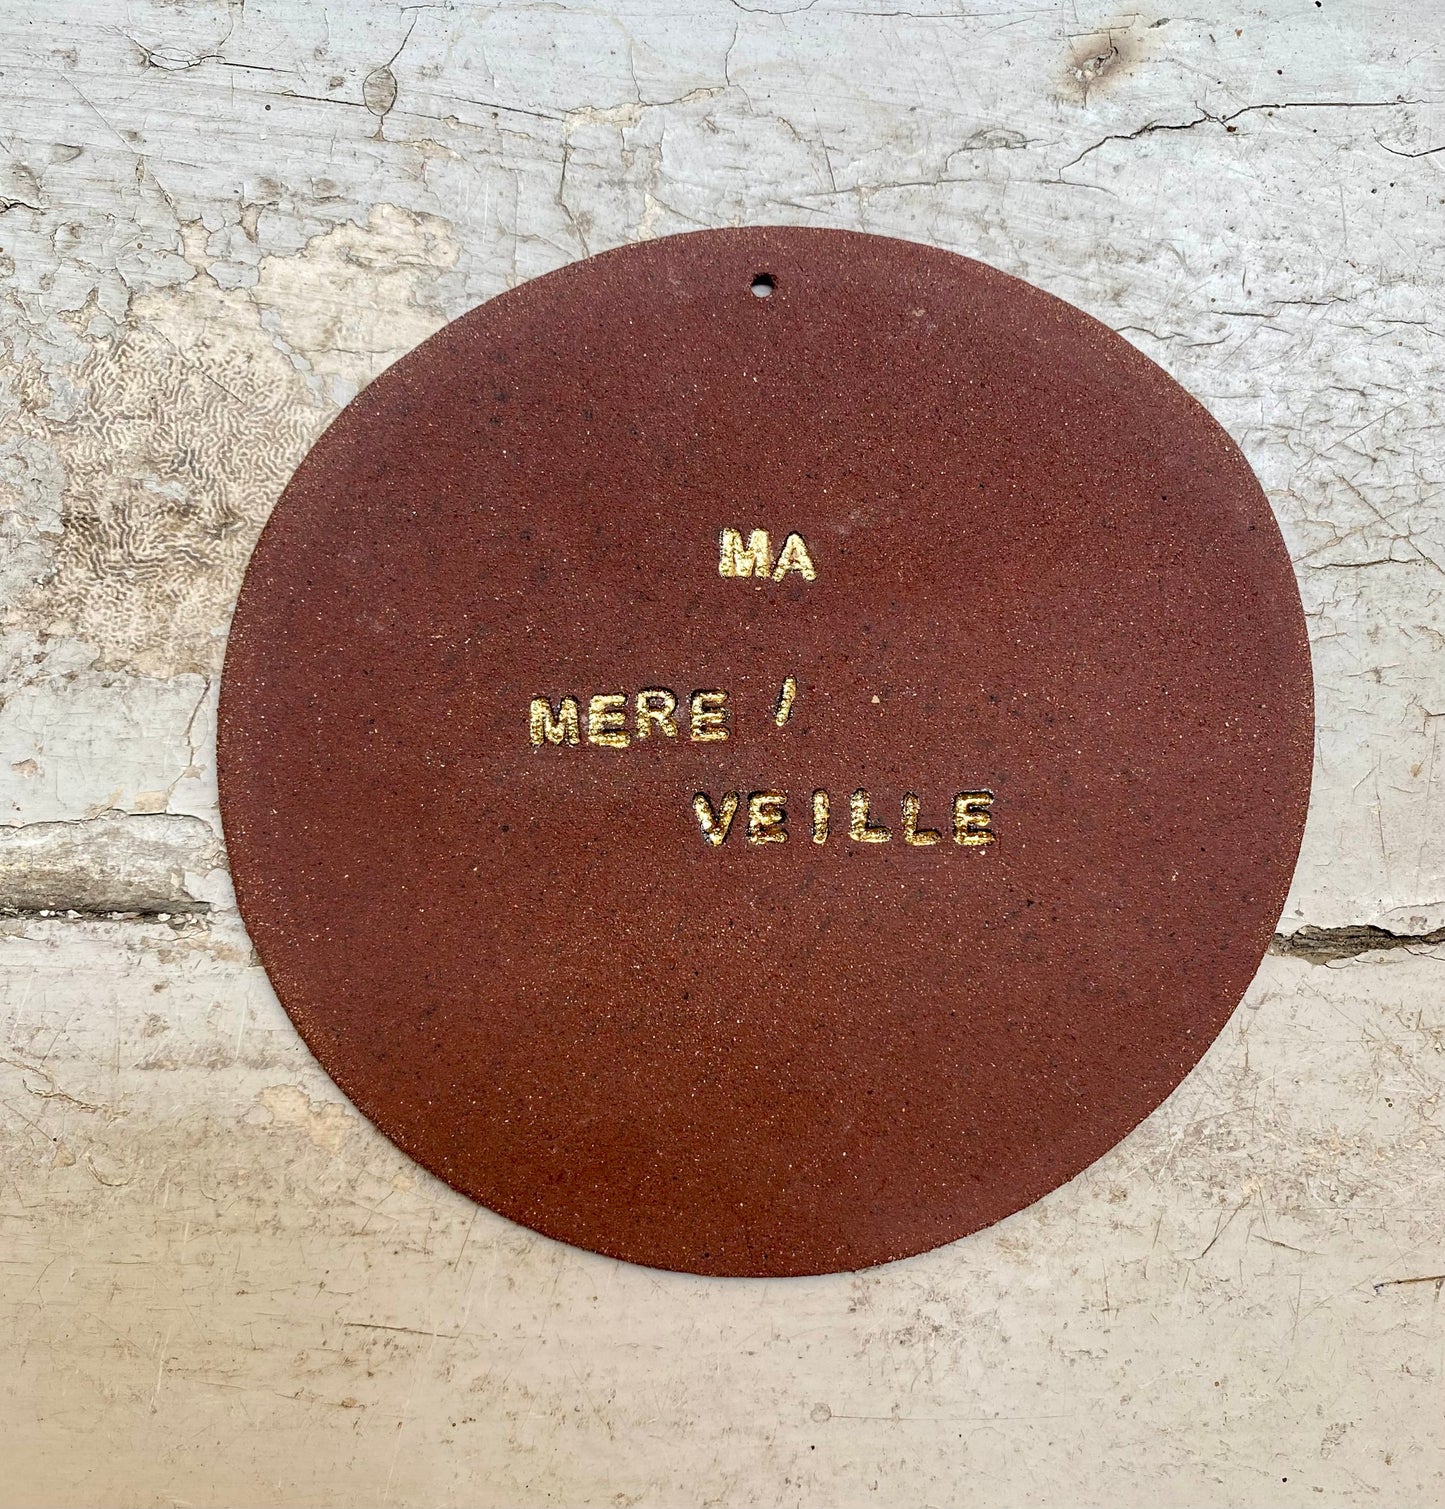 MA MERE-VEILLE